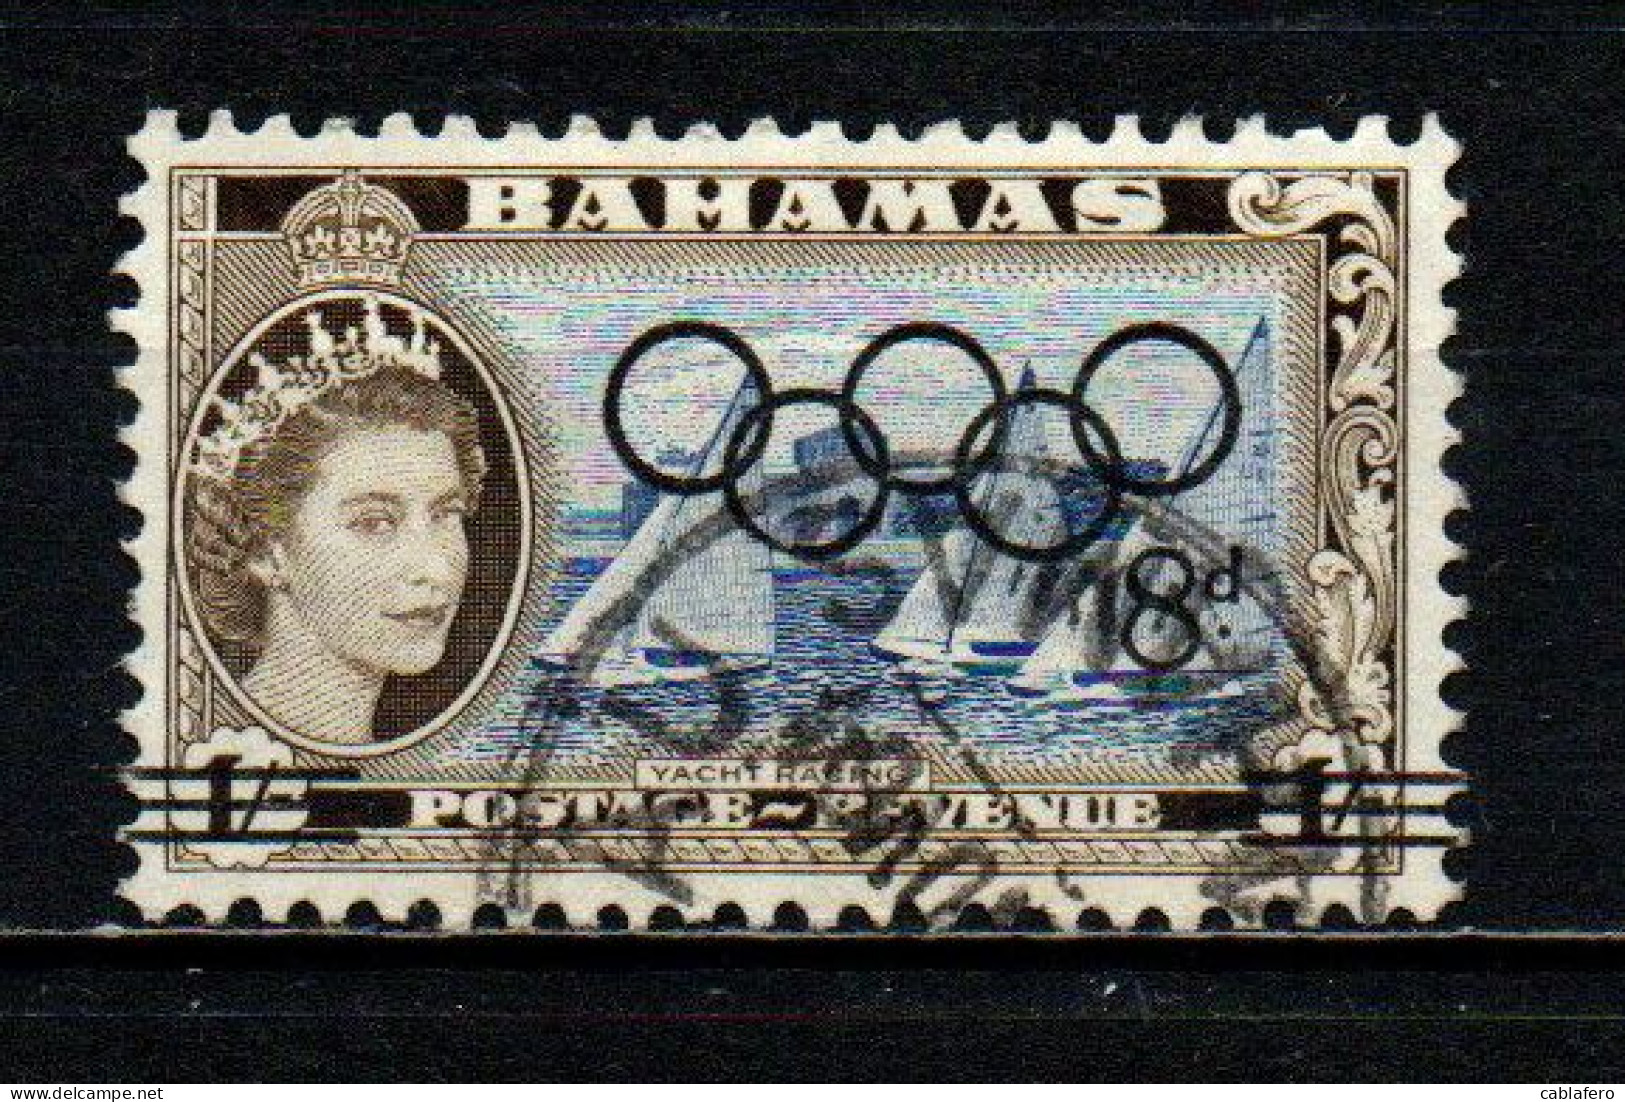 BAHAMAS - 1964 - 18th Olympic Games, Tokyo - USATO - 1963-1973 Ministerial Government